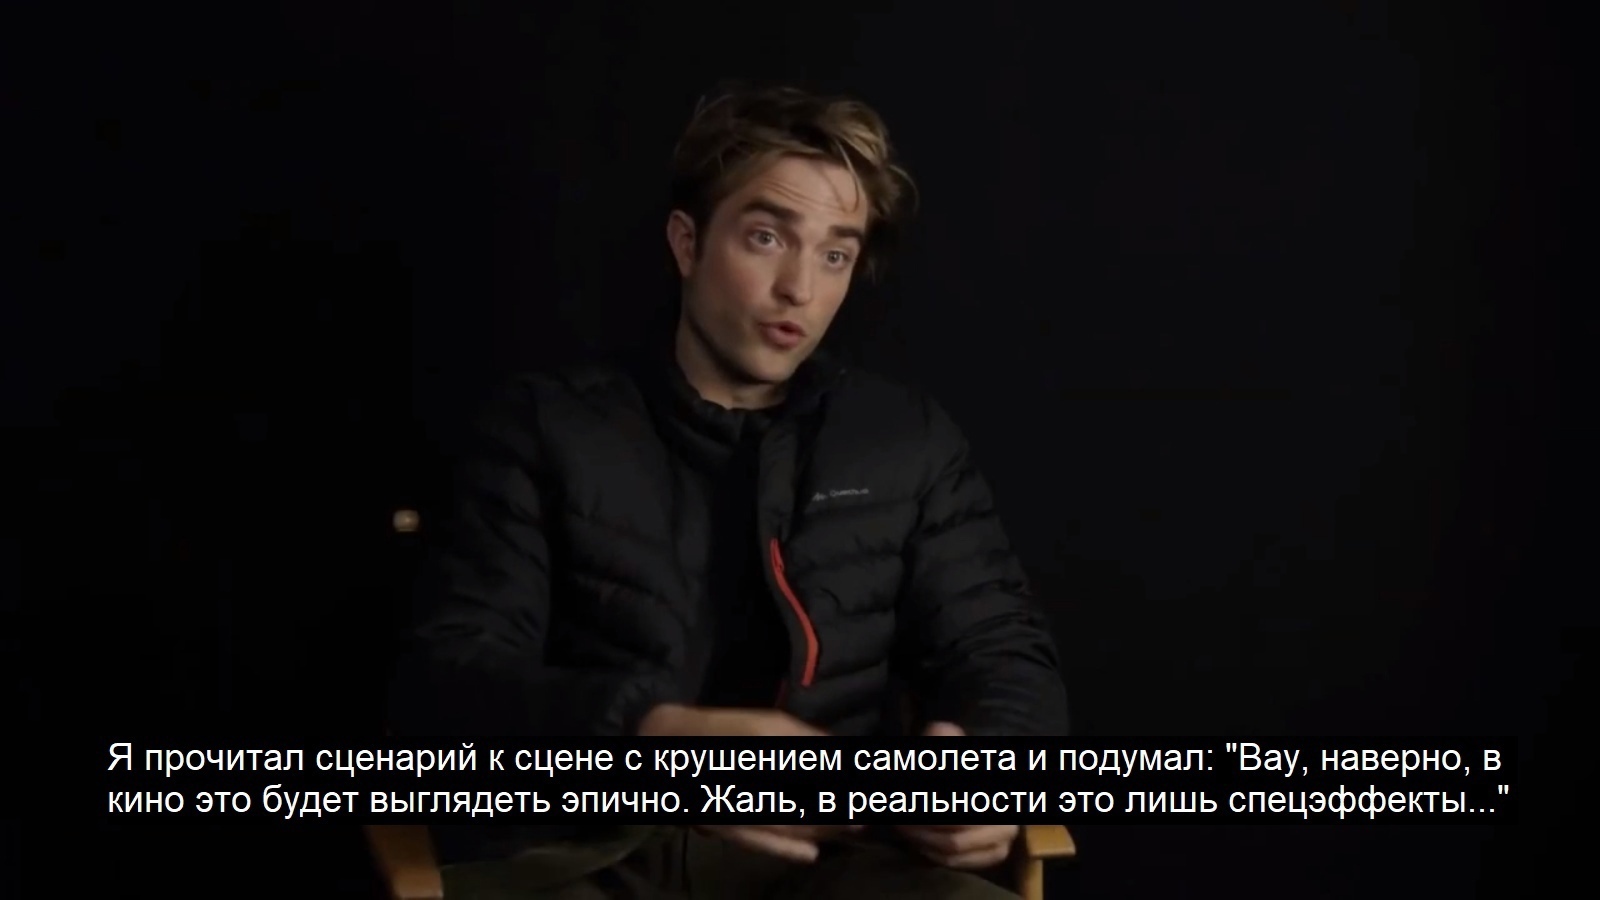 Christopher Nolan knows how to make films - Robert Pattison, Actors and actresses, Celebrities, Christopher Nolan, Argument, Movies, Airplane, Scene from the movie, , Storyboard, From the network, Longpost